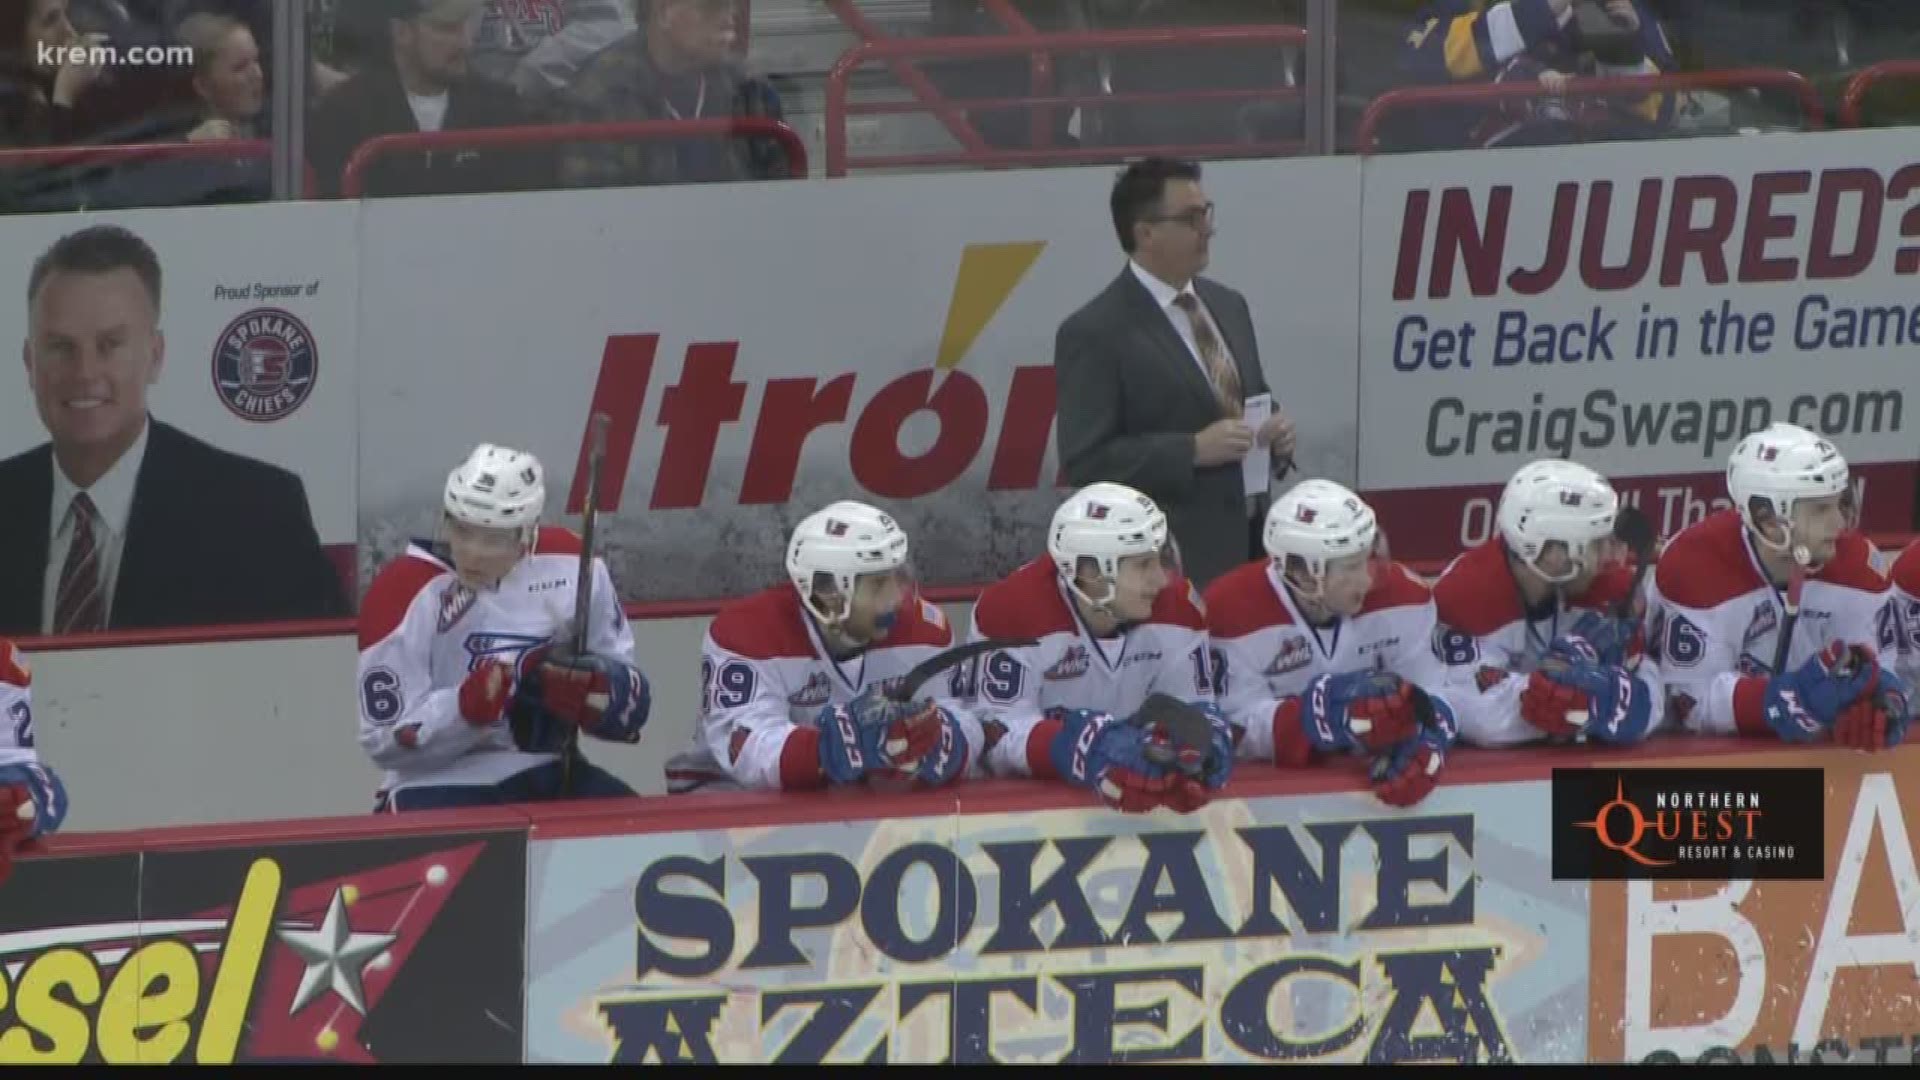 Portland scores two unanswered goals late in the 3rd period to beat Spokane, 4-3. The Chiefs now trail 3-1 in the series.